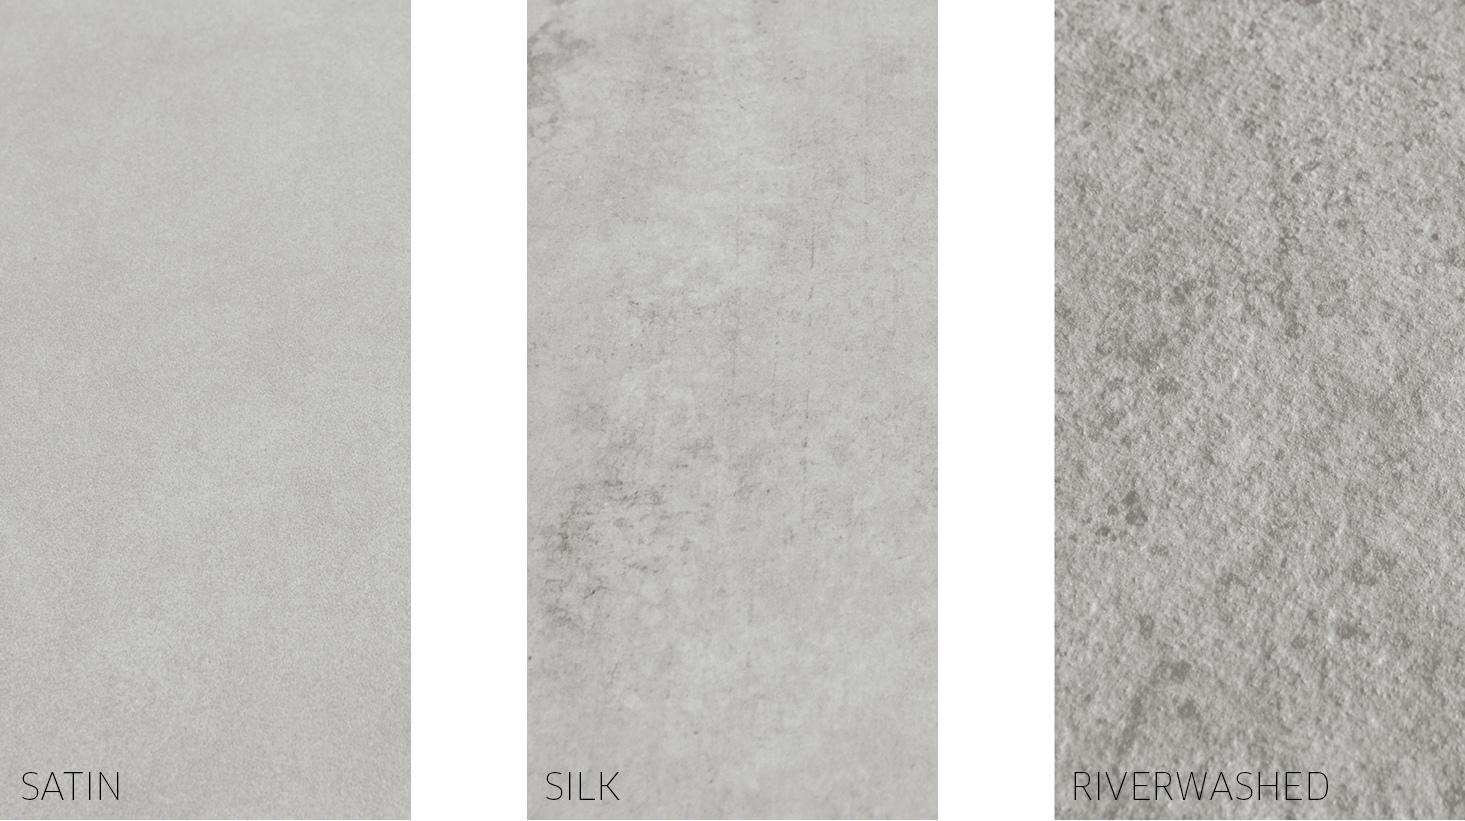 Satin, Silk and Riverwashed Neolith Worktops